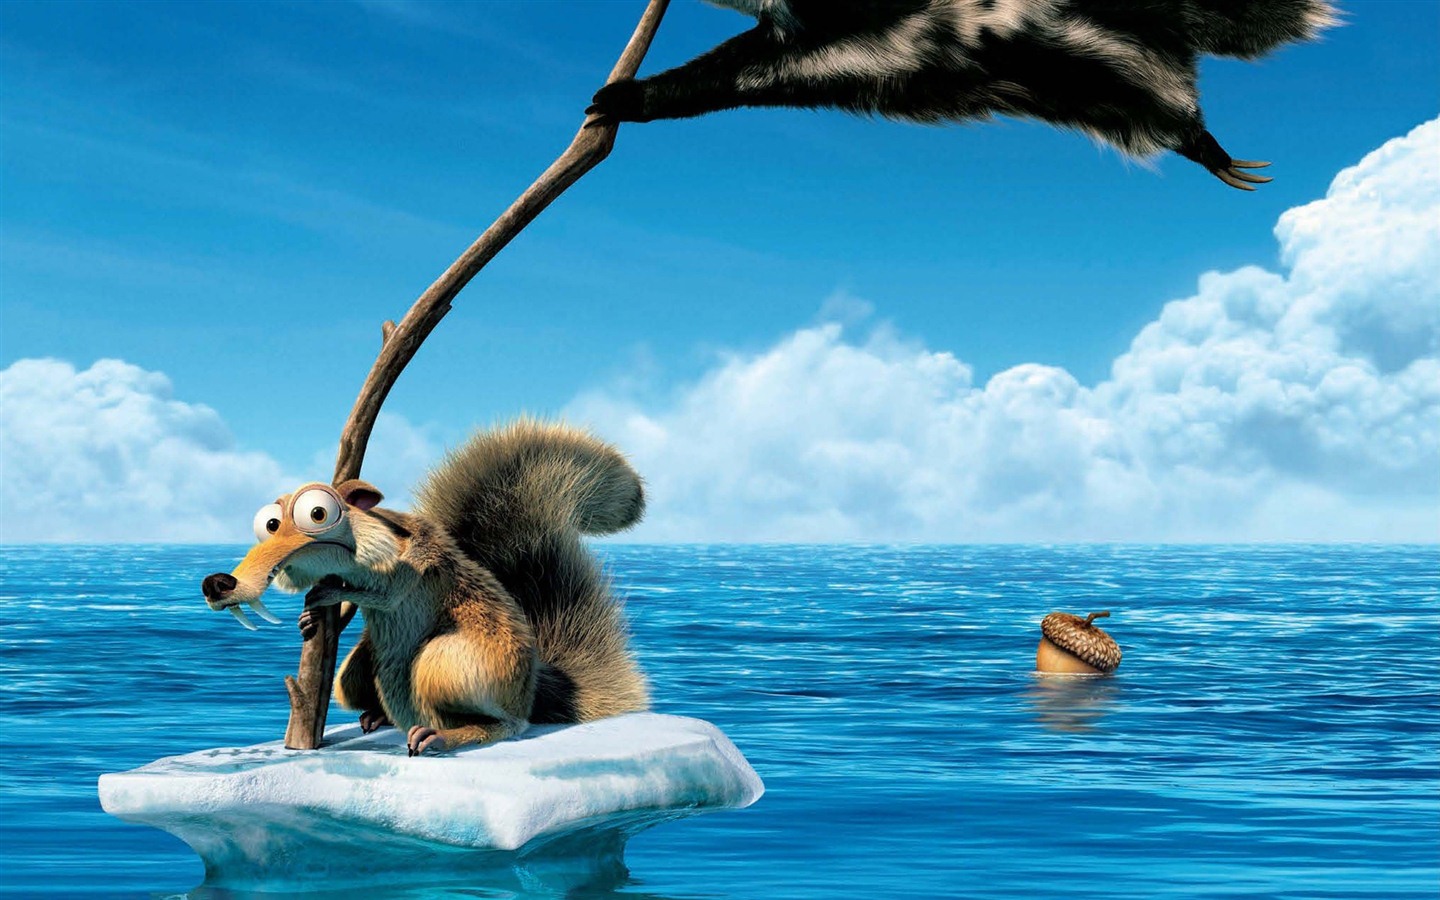 Ice Age: Continental Drift for ipod download